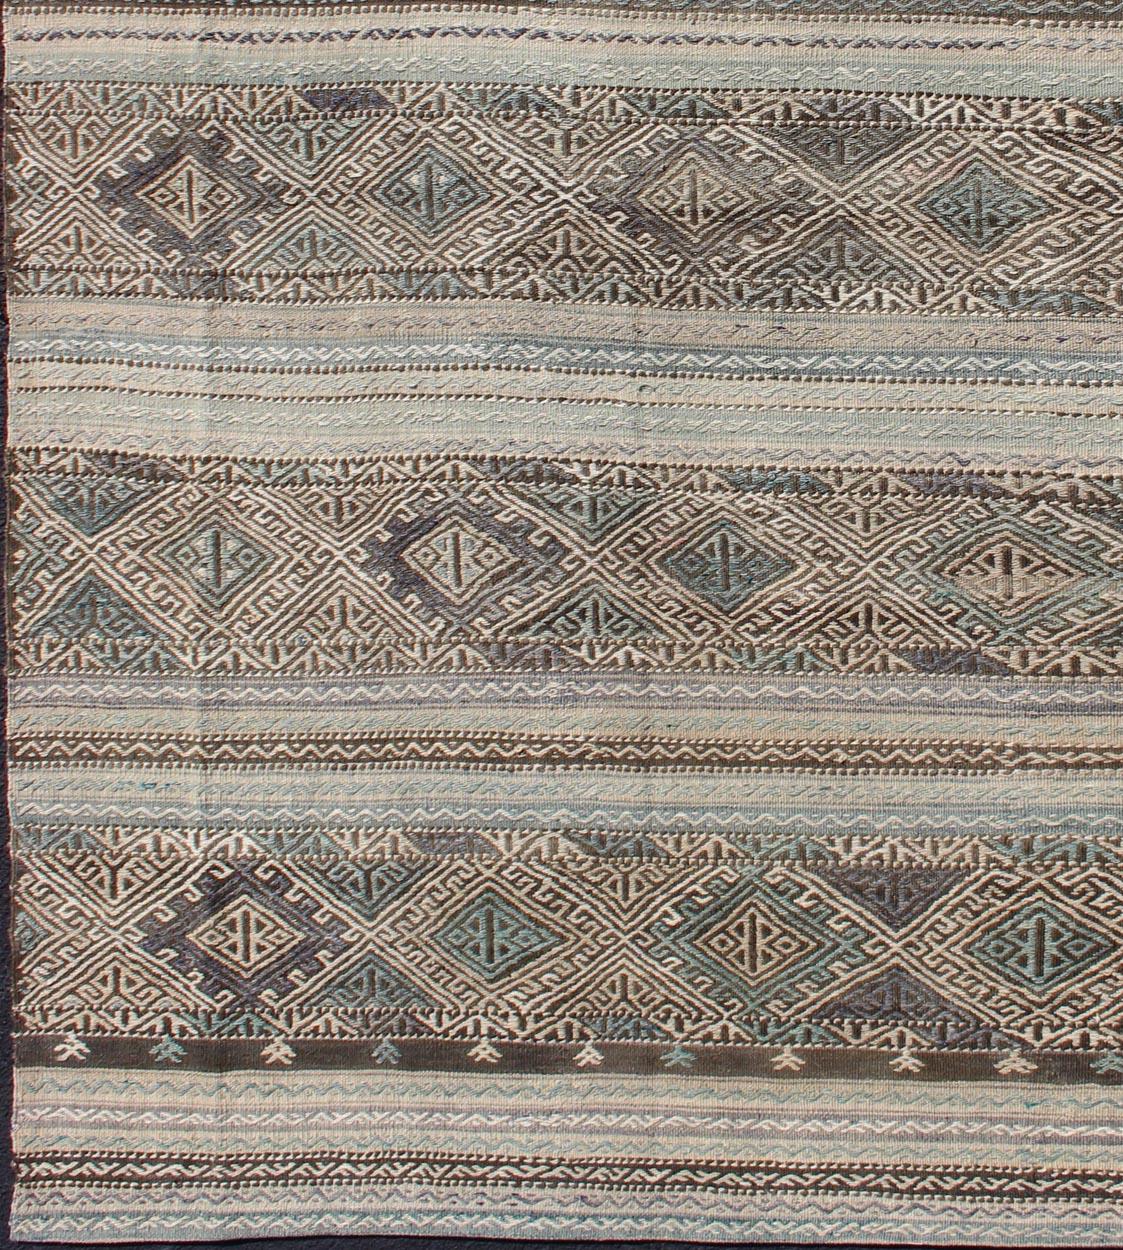 Turkish Flat-Weave Embroideries Kilim in Taupe, Green, Teal, Blue and Brown For Sale